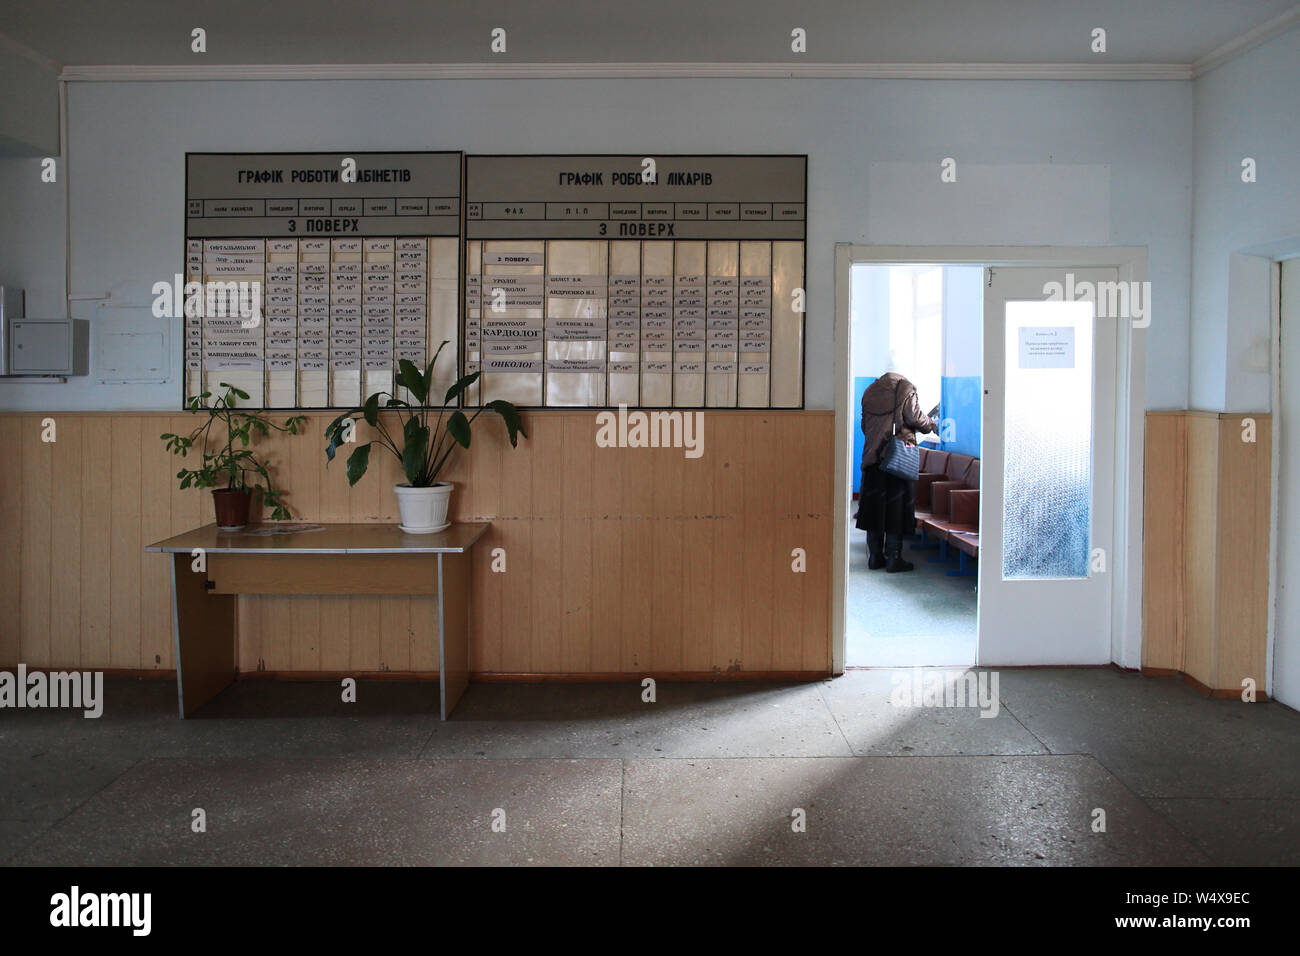 A patient is waiting for her treatment in the waiting room of the Polyclinic in Ivankov, Poliske Raion, Kiev Oblast, northern Ukraine, Europe Stock Photo